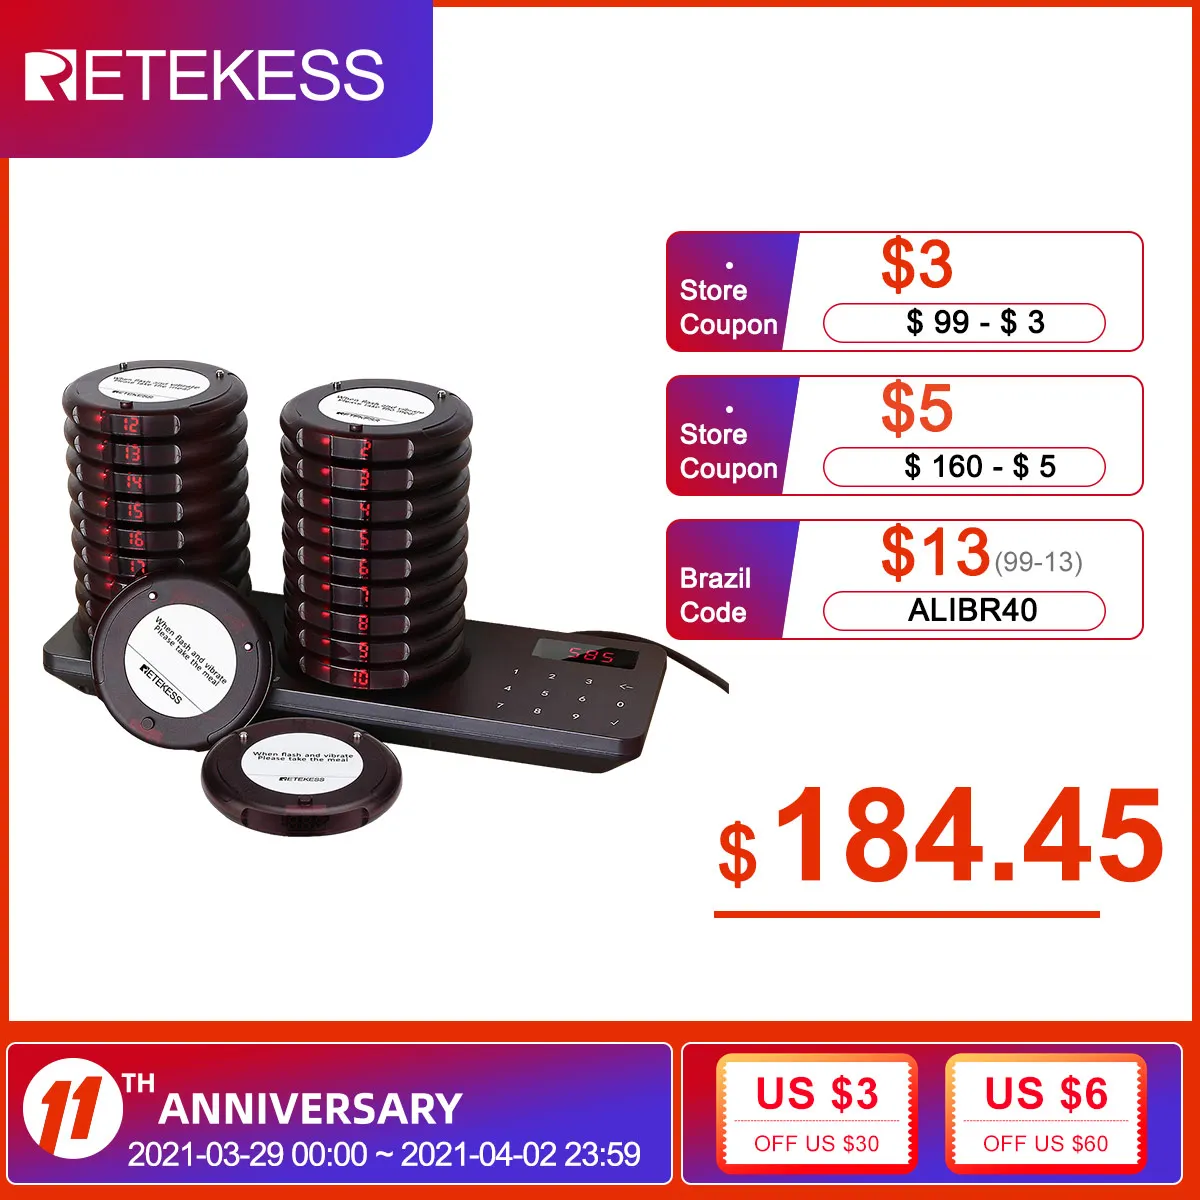 Retekess TD163 Pager Restaurant With 20 Buzzers For Restaurant Clinic Hospital Pager System Restaurant Calling System